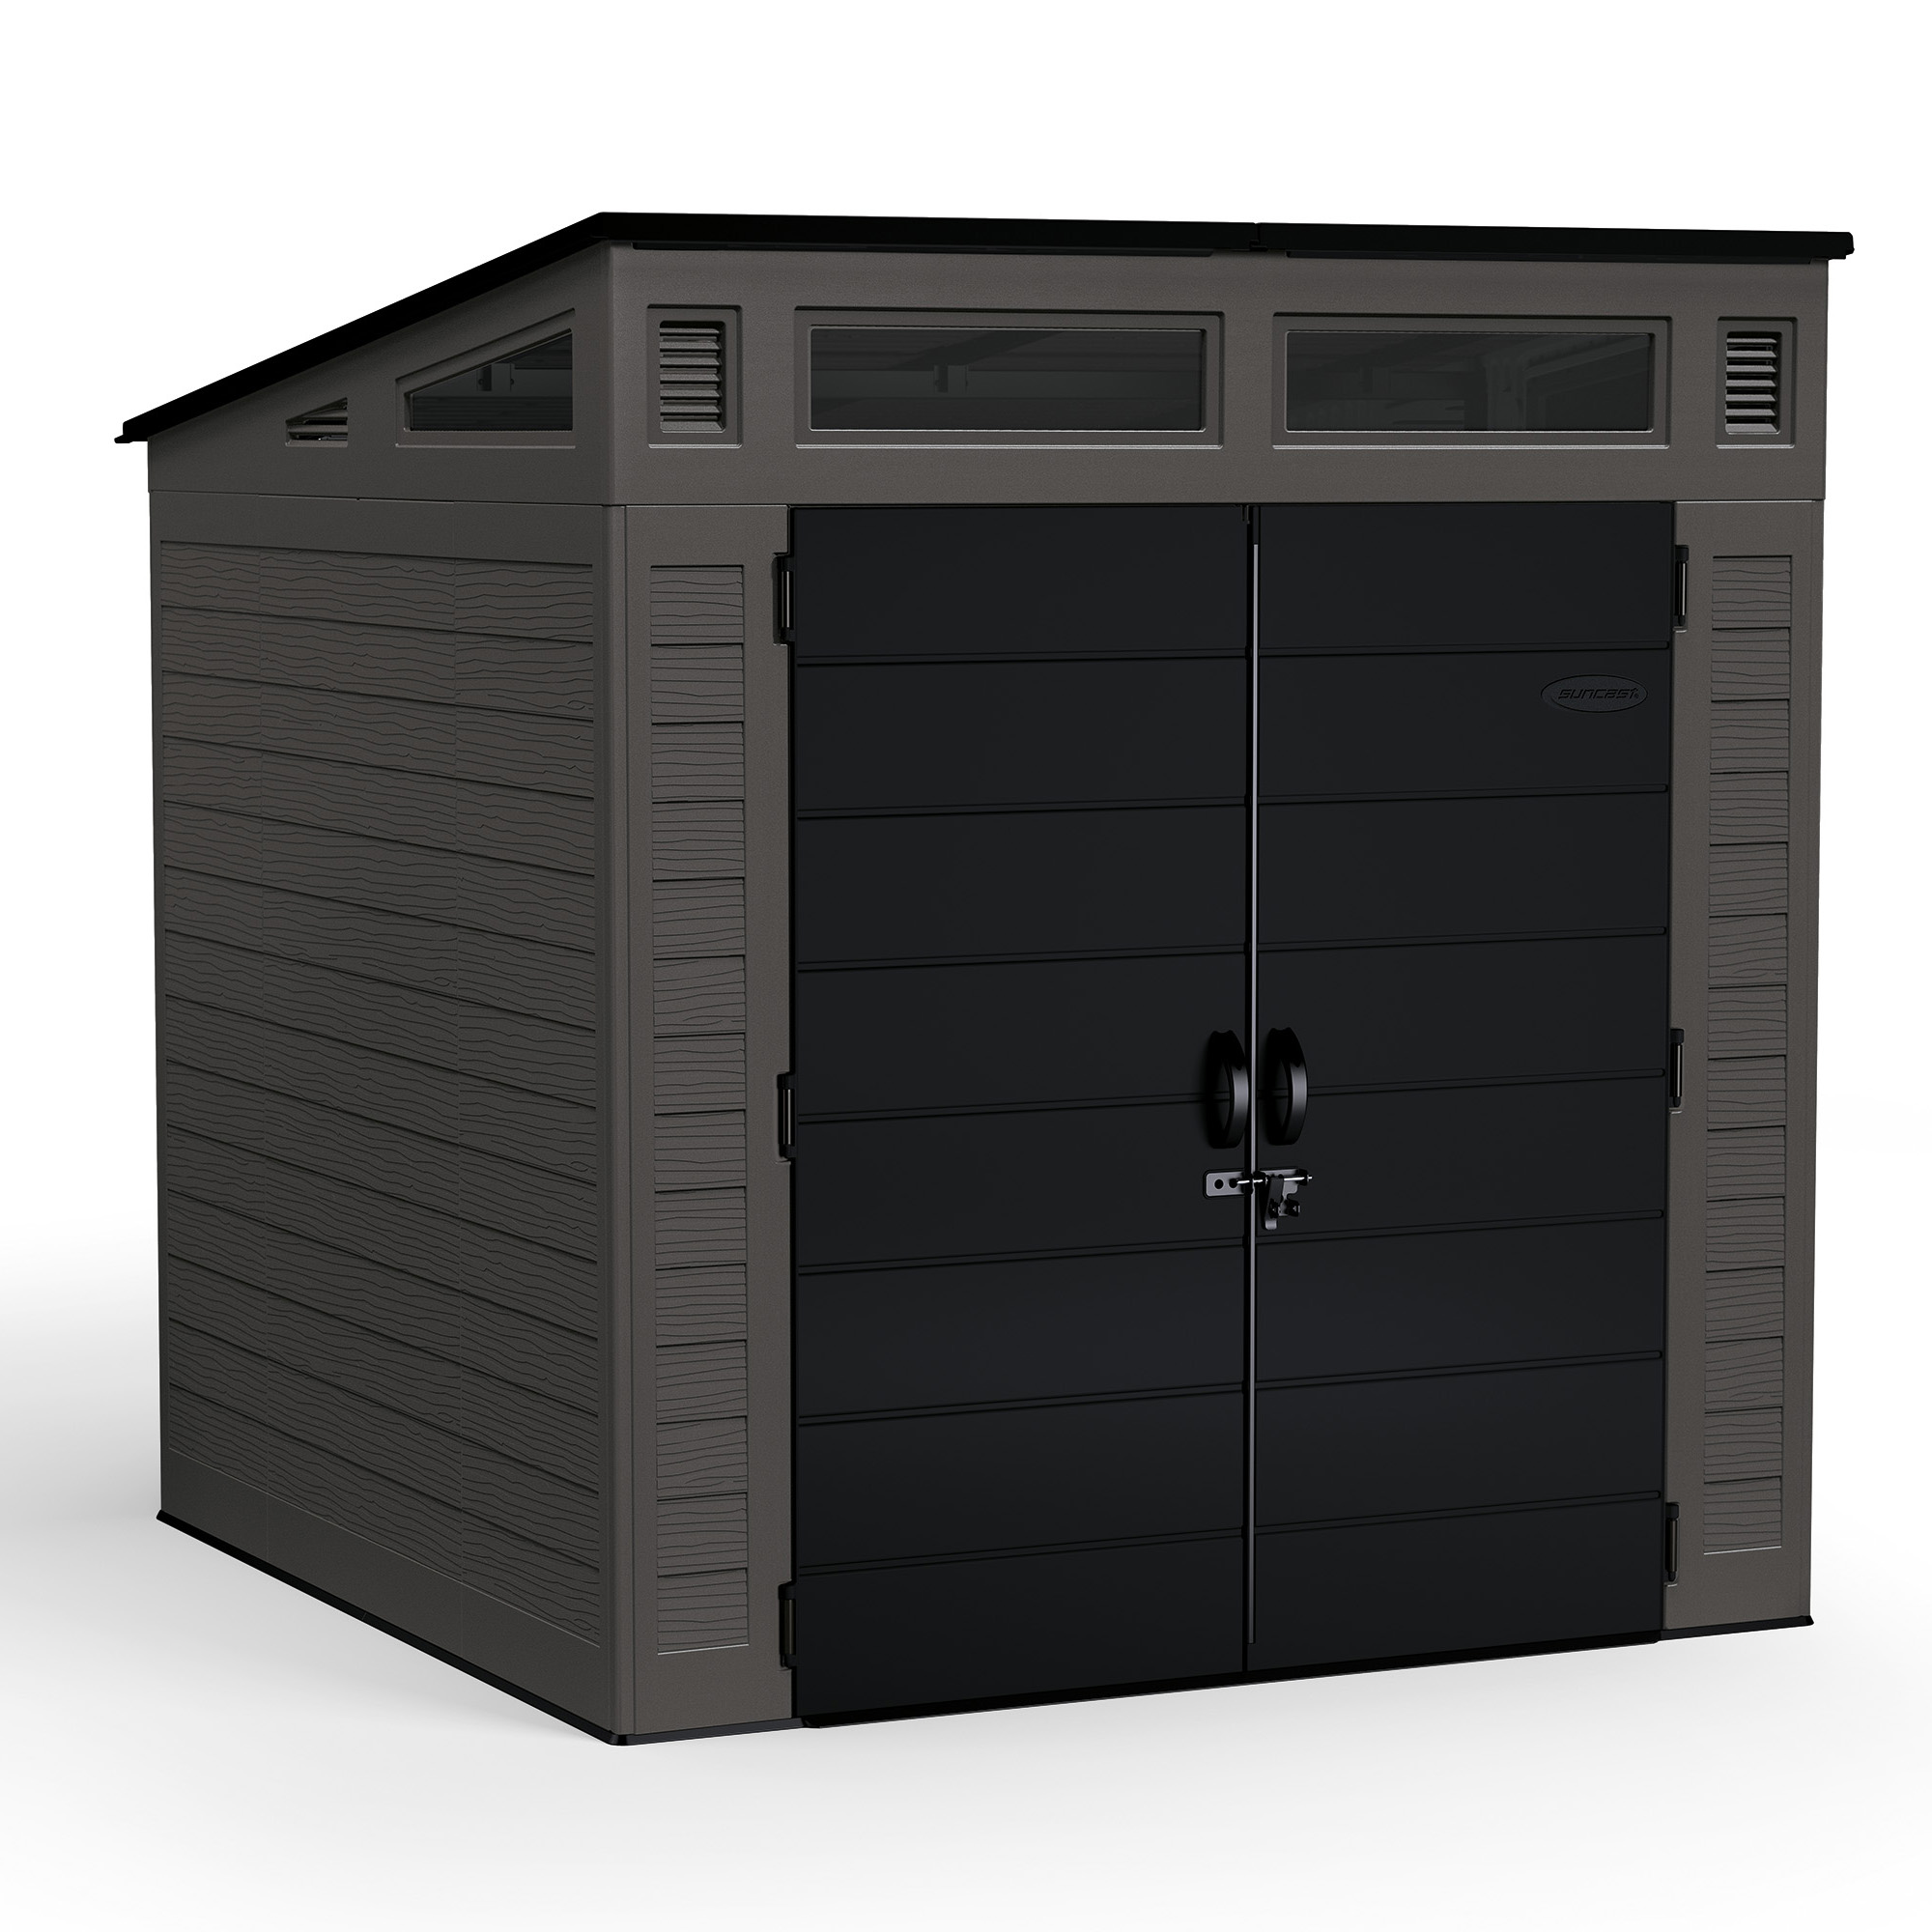 Suncast Resin Modernist Outdoor Storage Shed, Black and Gray, 86.5 in D x 89.5 in H x 87.5 in W - image 1 of 5